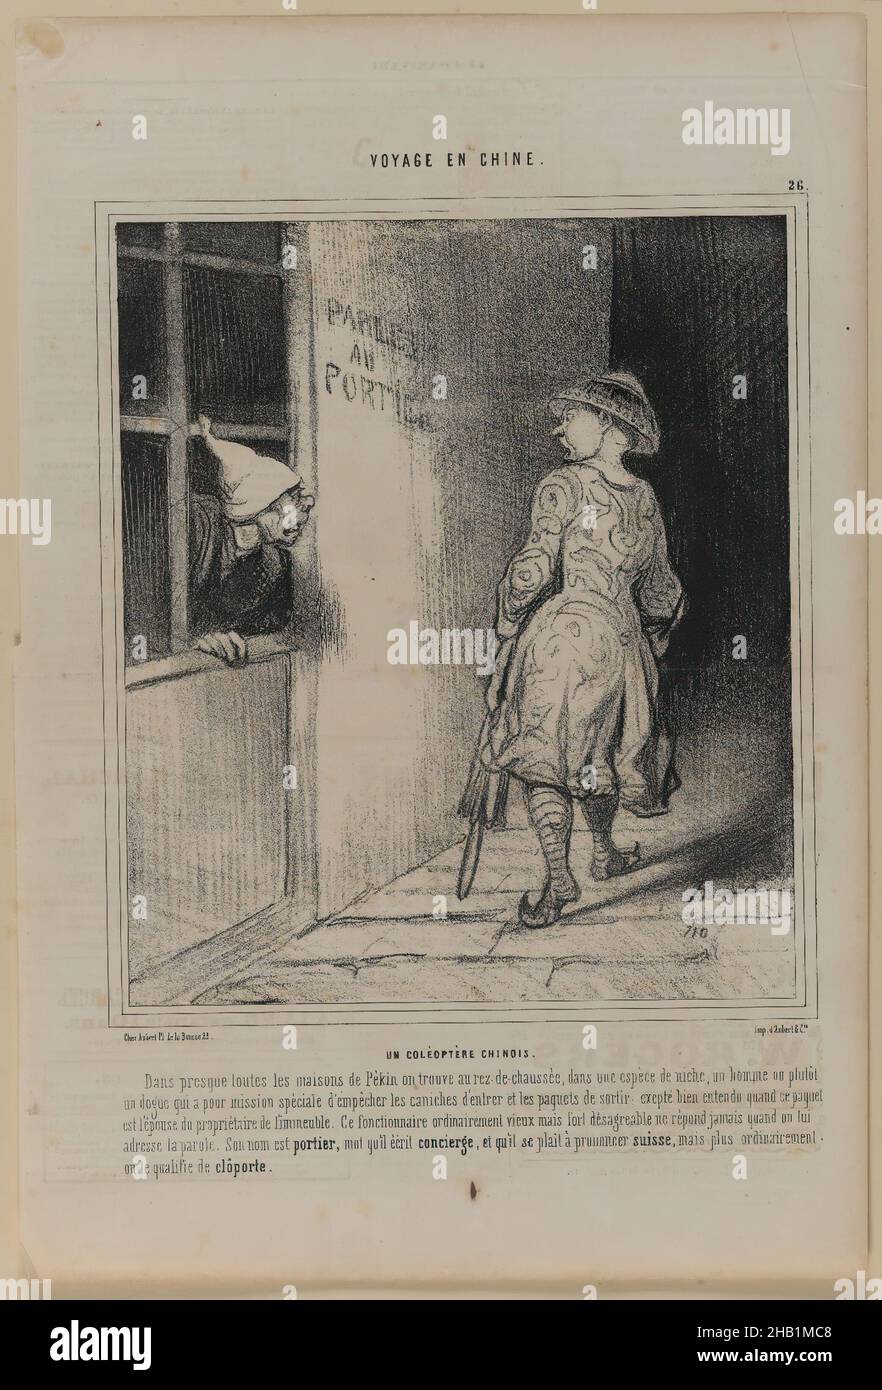 Un Coléoptère Chinois, Honoré Daumier, French, 1808-1879, Lithograph on newsprint, France, January 26, 1845, Sheet: 14 1/4 x 9 11/16 in., 36.2 x 24.6 cm Stock Photo